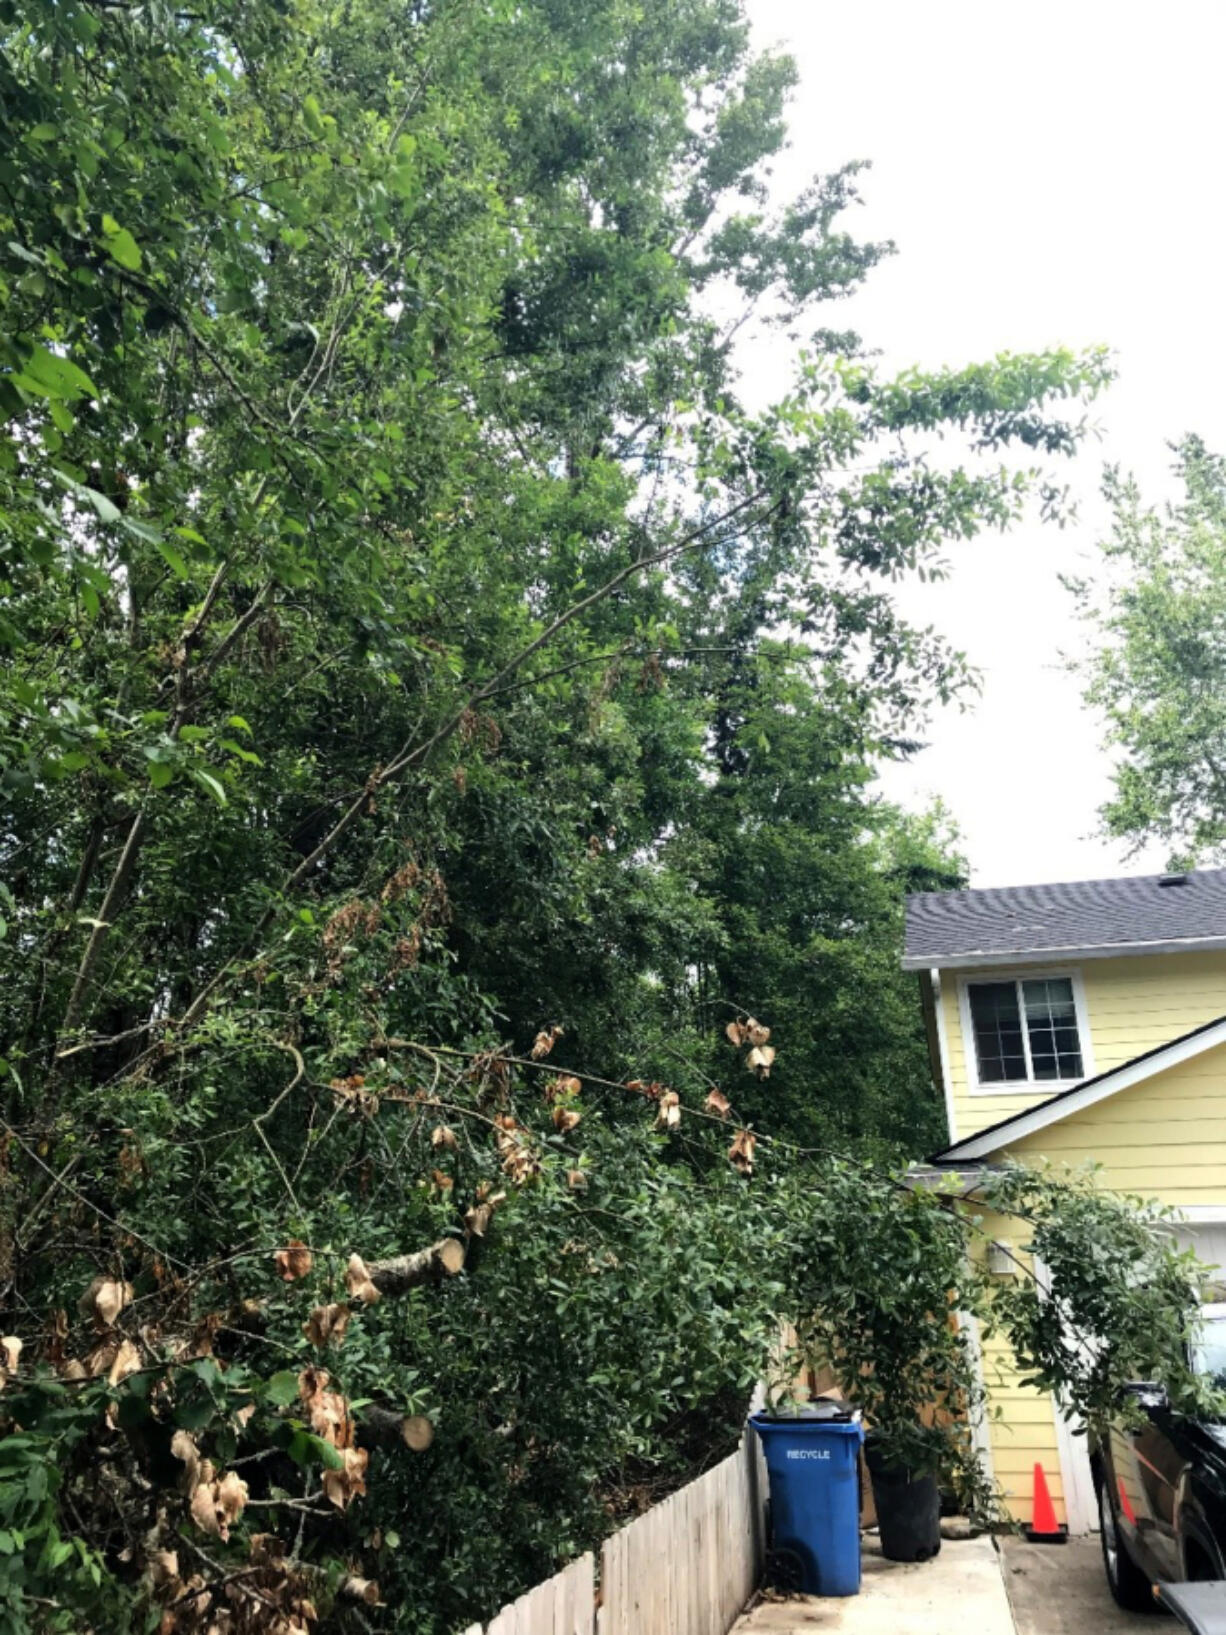 "So many problems between neighbors can be avoided with a little proactive pruning," said arborist Frank Krawczyk of PNW Tree Consulting.